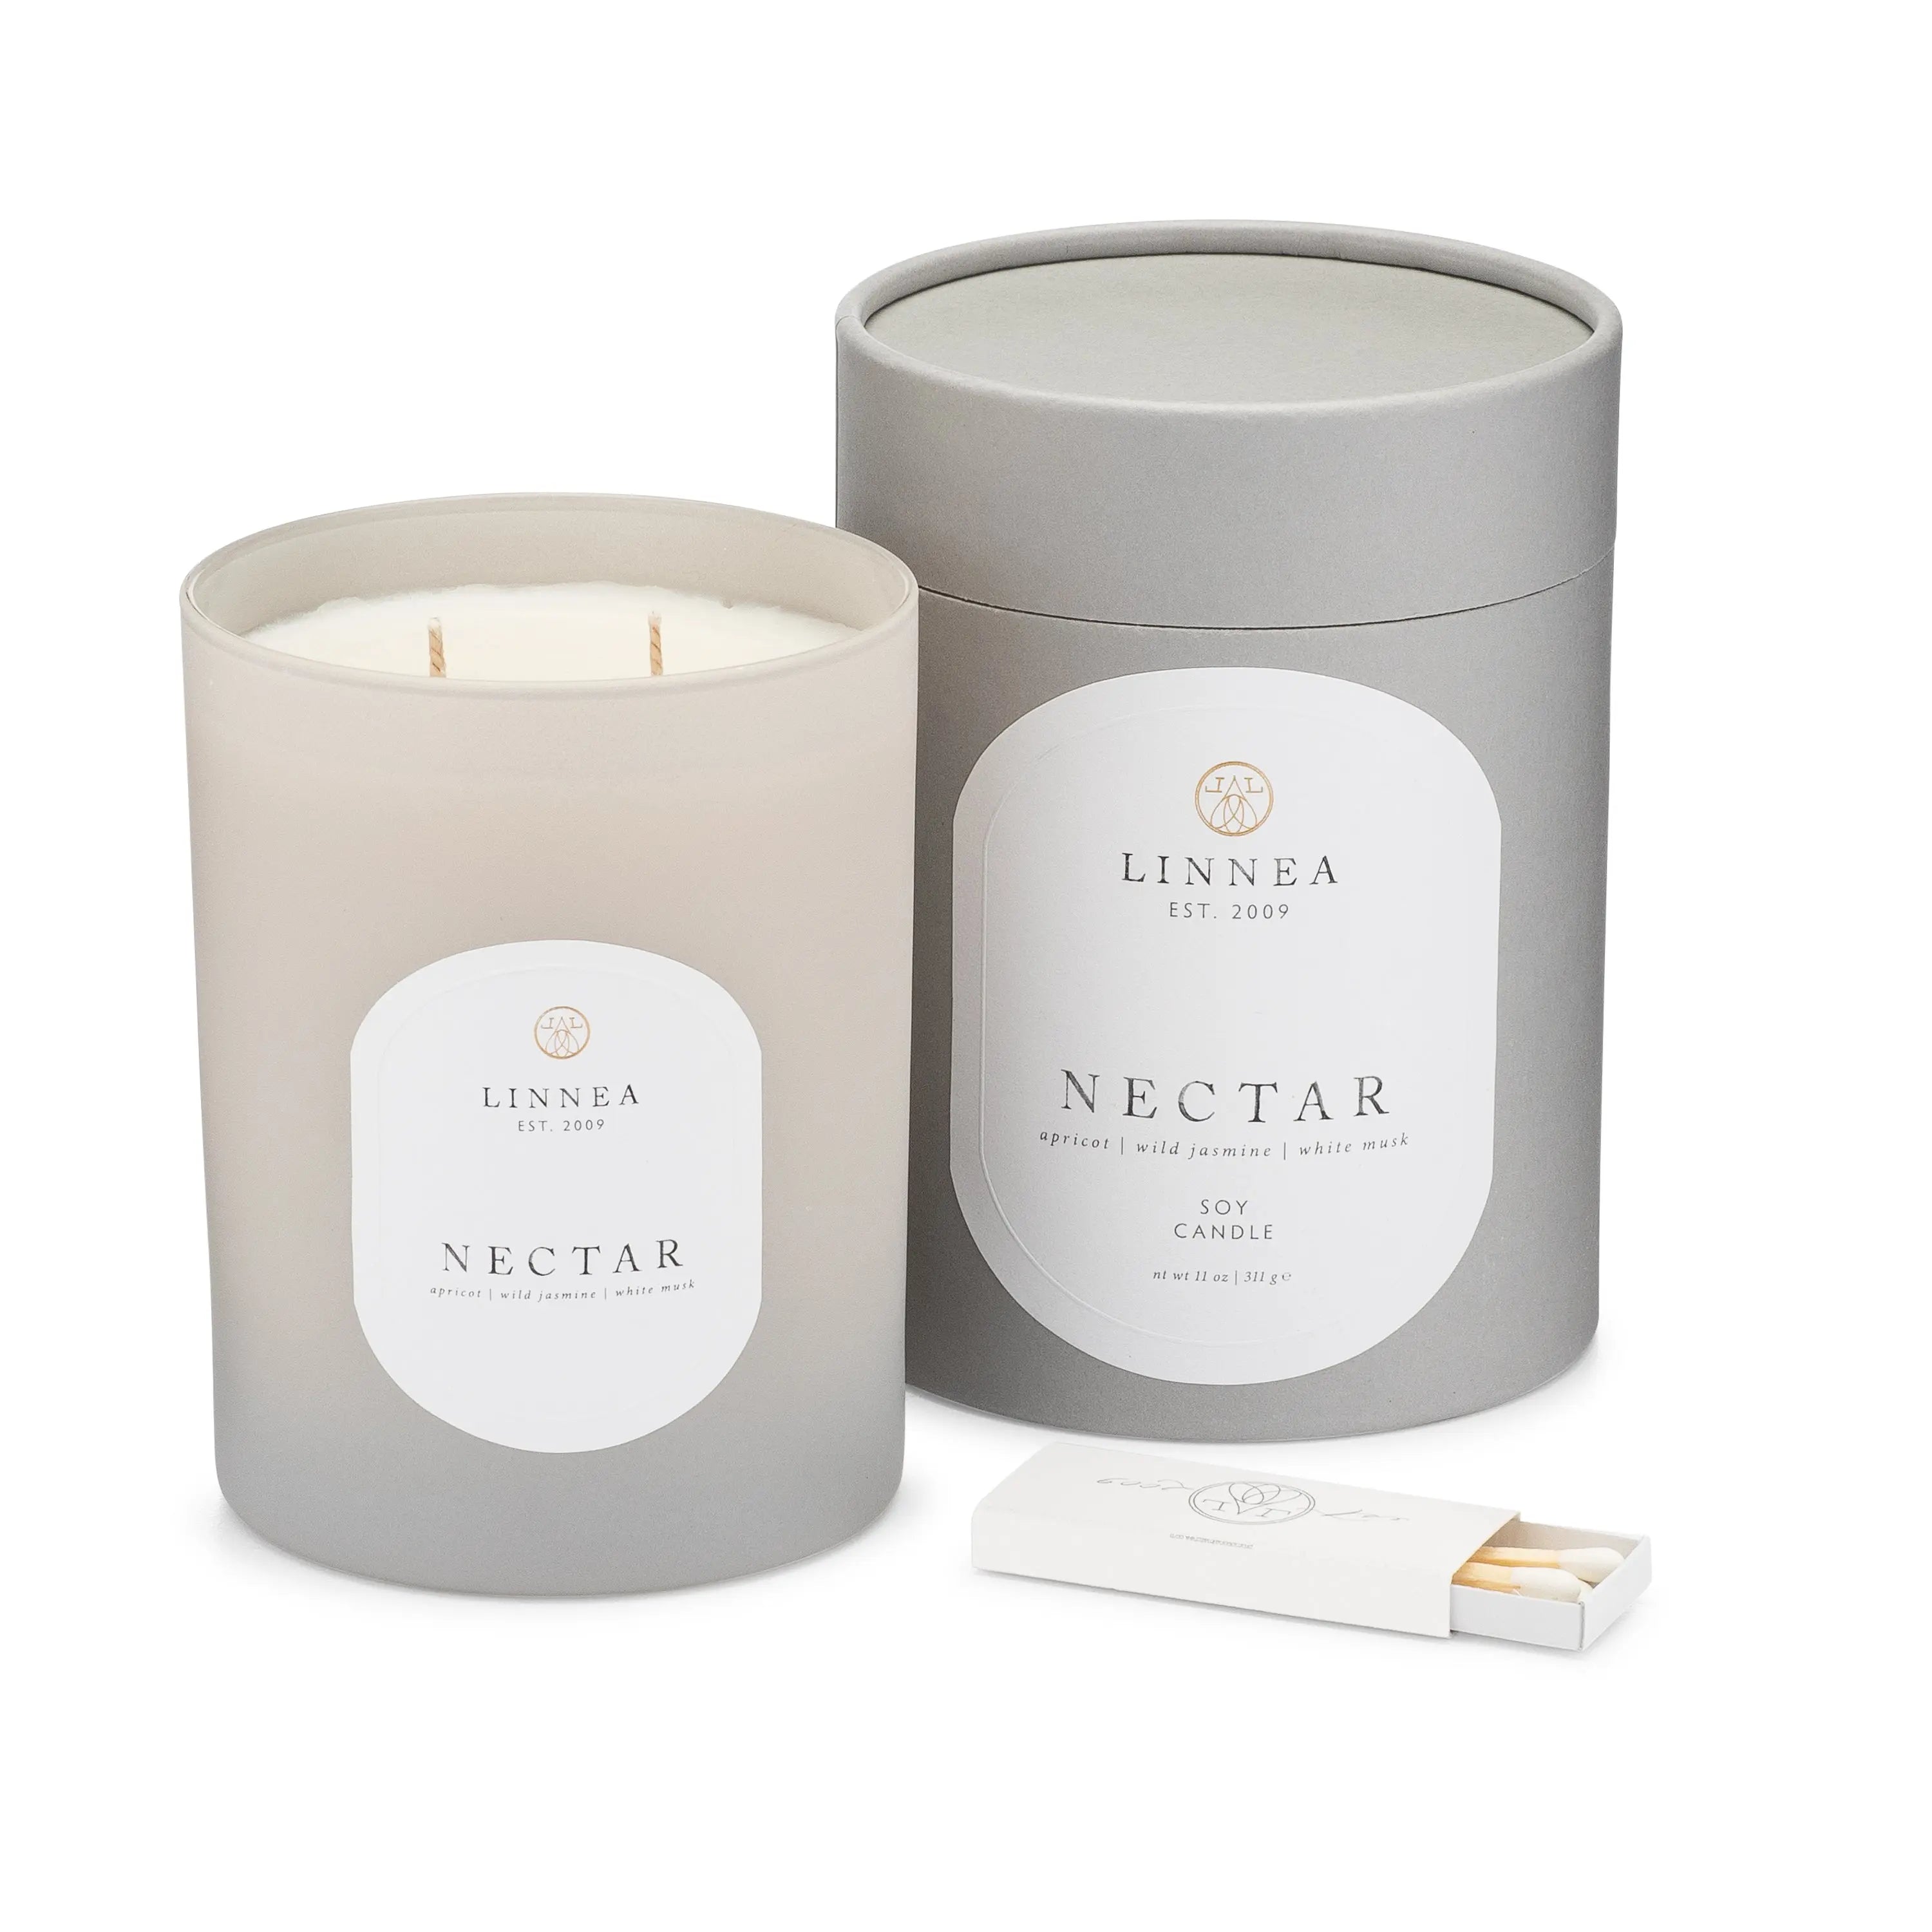 LINNEA Scented Candle in Nectar - Home Smith